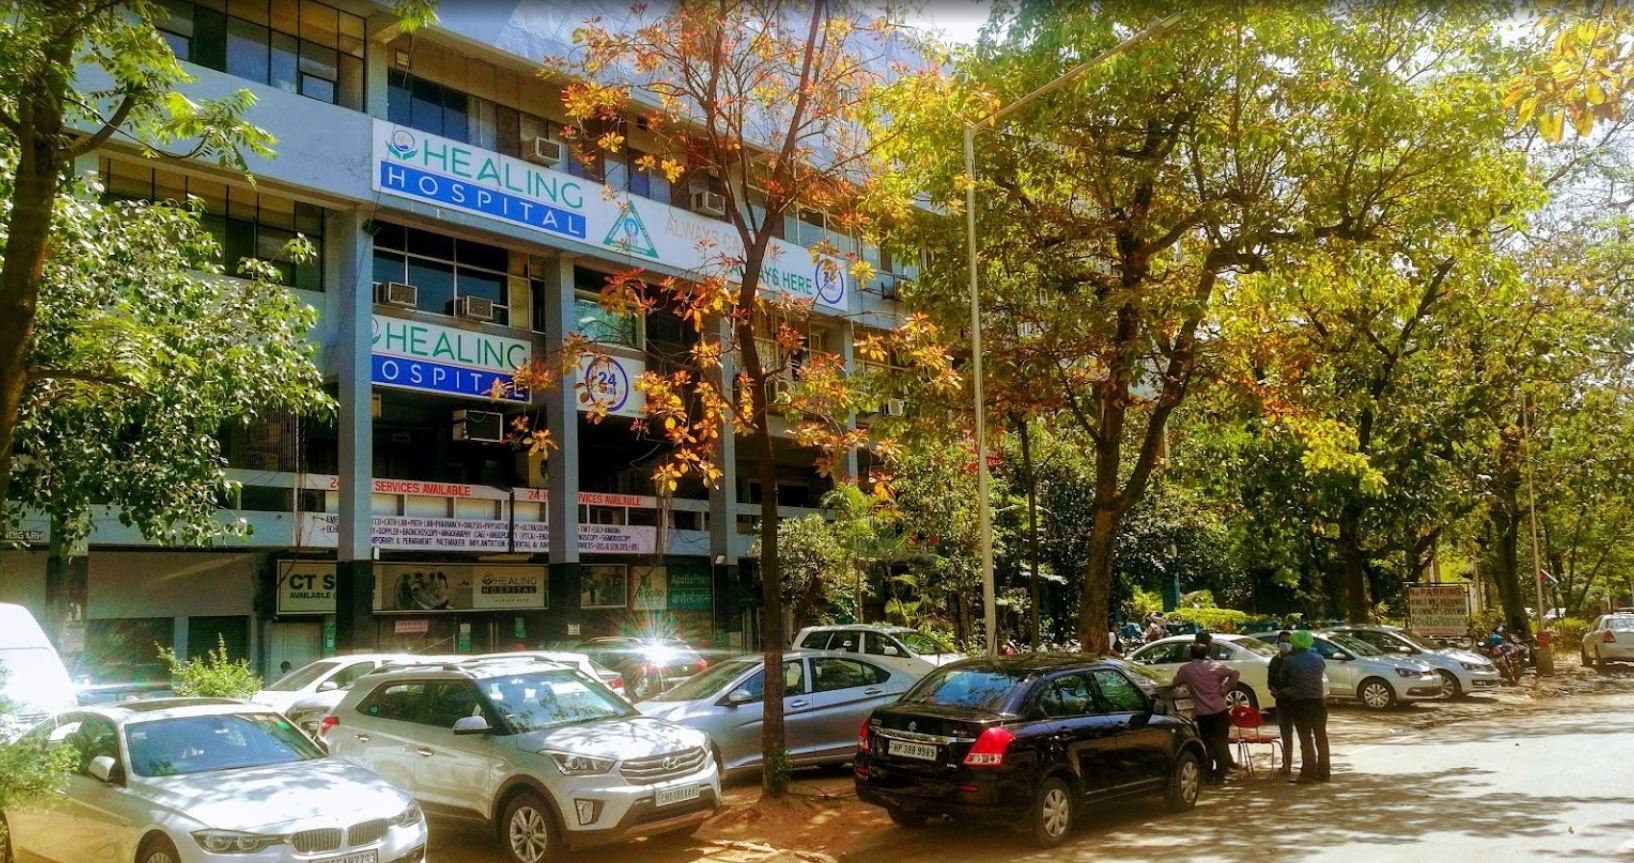 Healing Hospital And Institute Of Paramedical Sciences